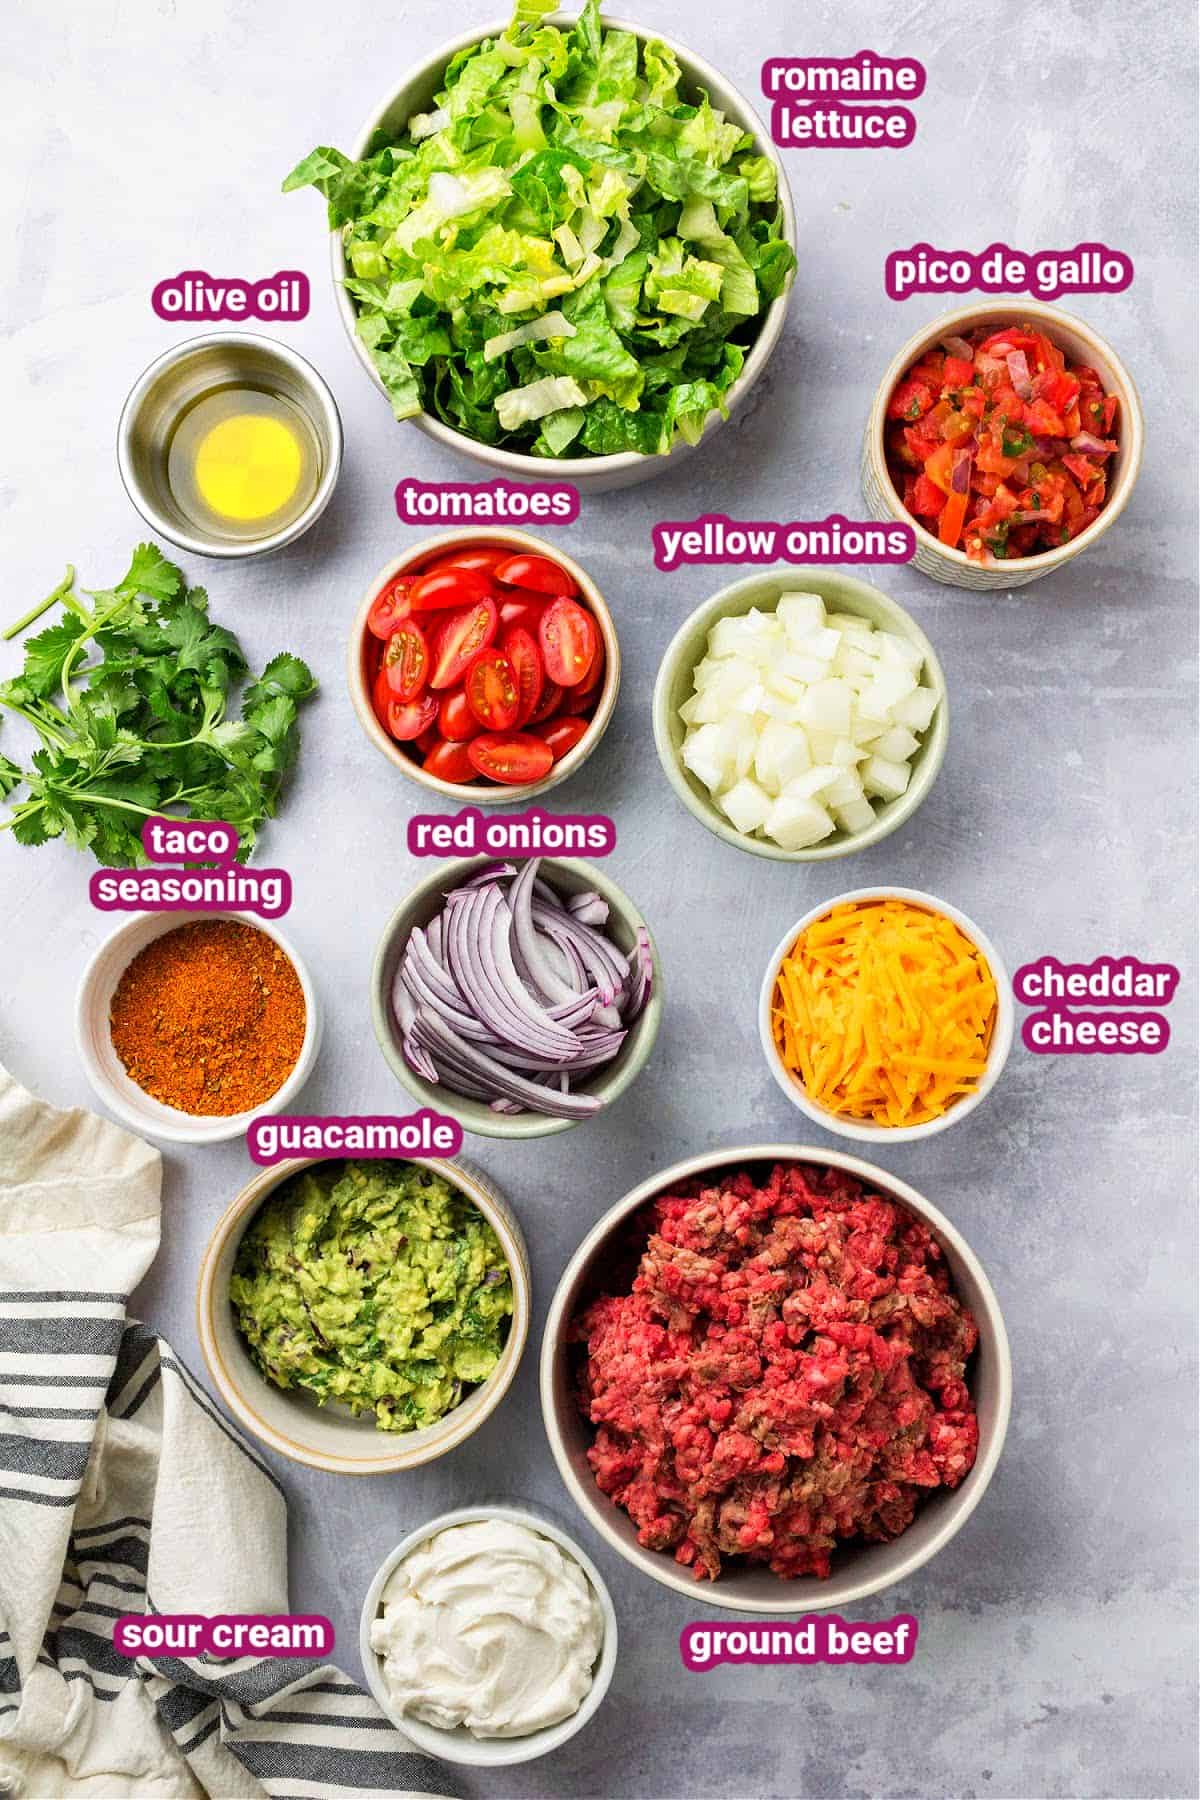 keto taco salad bowl ingredients like lettuce, salsa, taco seasoning, ground beef, red onions, tomato, cheddar cheese, yellow onions, guacamole, olive oil, and sour cream